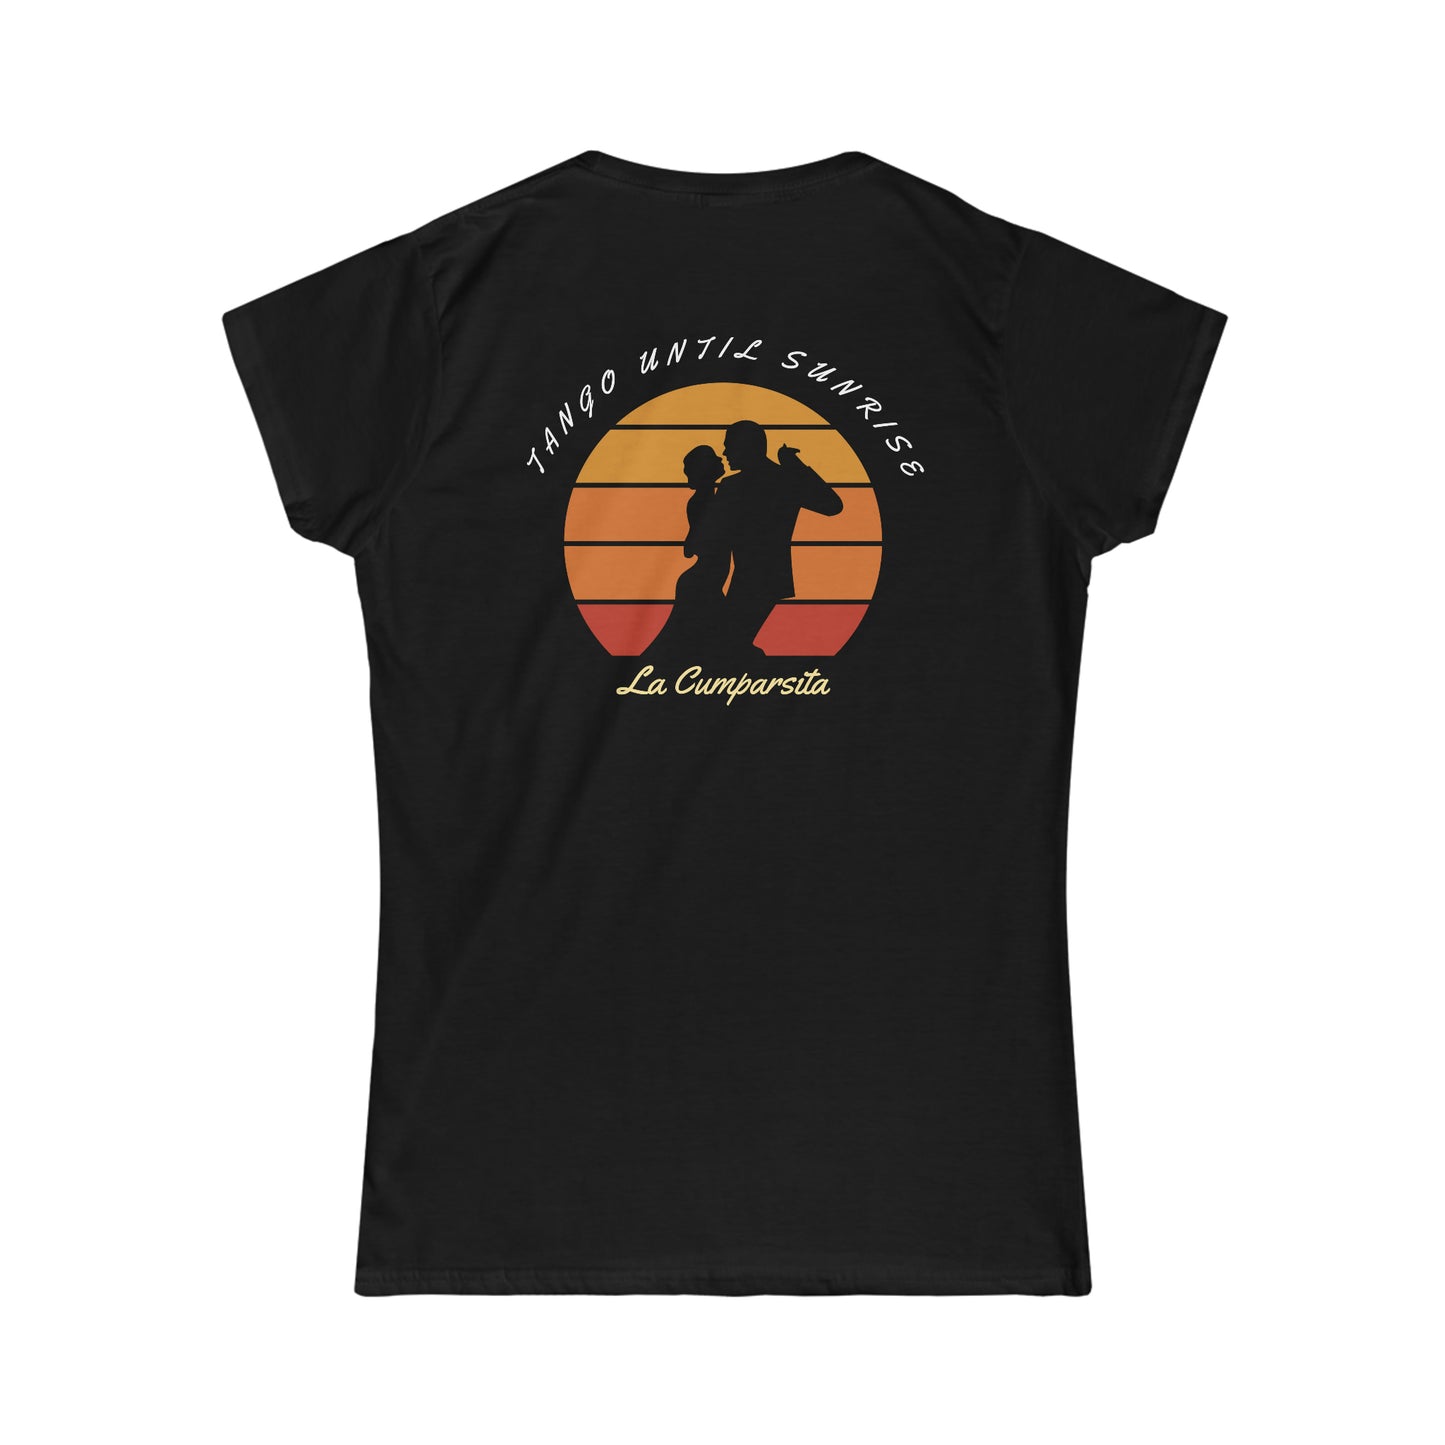 An argentine tango dance tshirt with the text "Tango until sunris. La Cumparsita" written on it and a silhouette of 2 argentine tango dancers dancing in front of the sun going down. A funny dance tshirt for tango dancers.